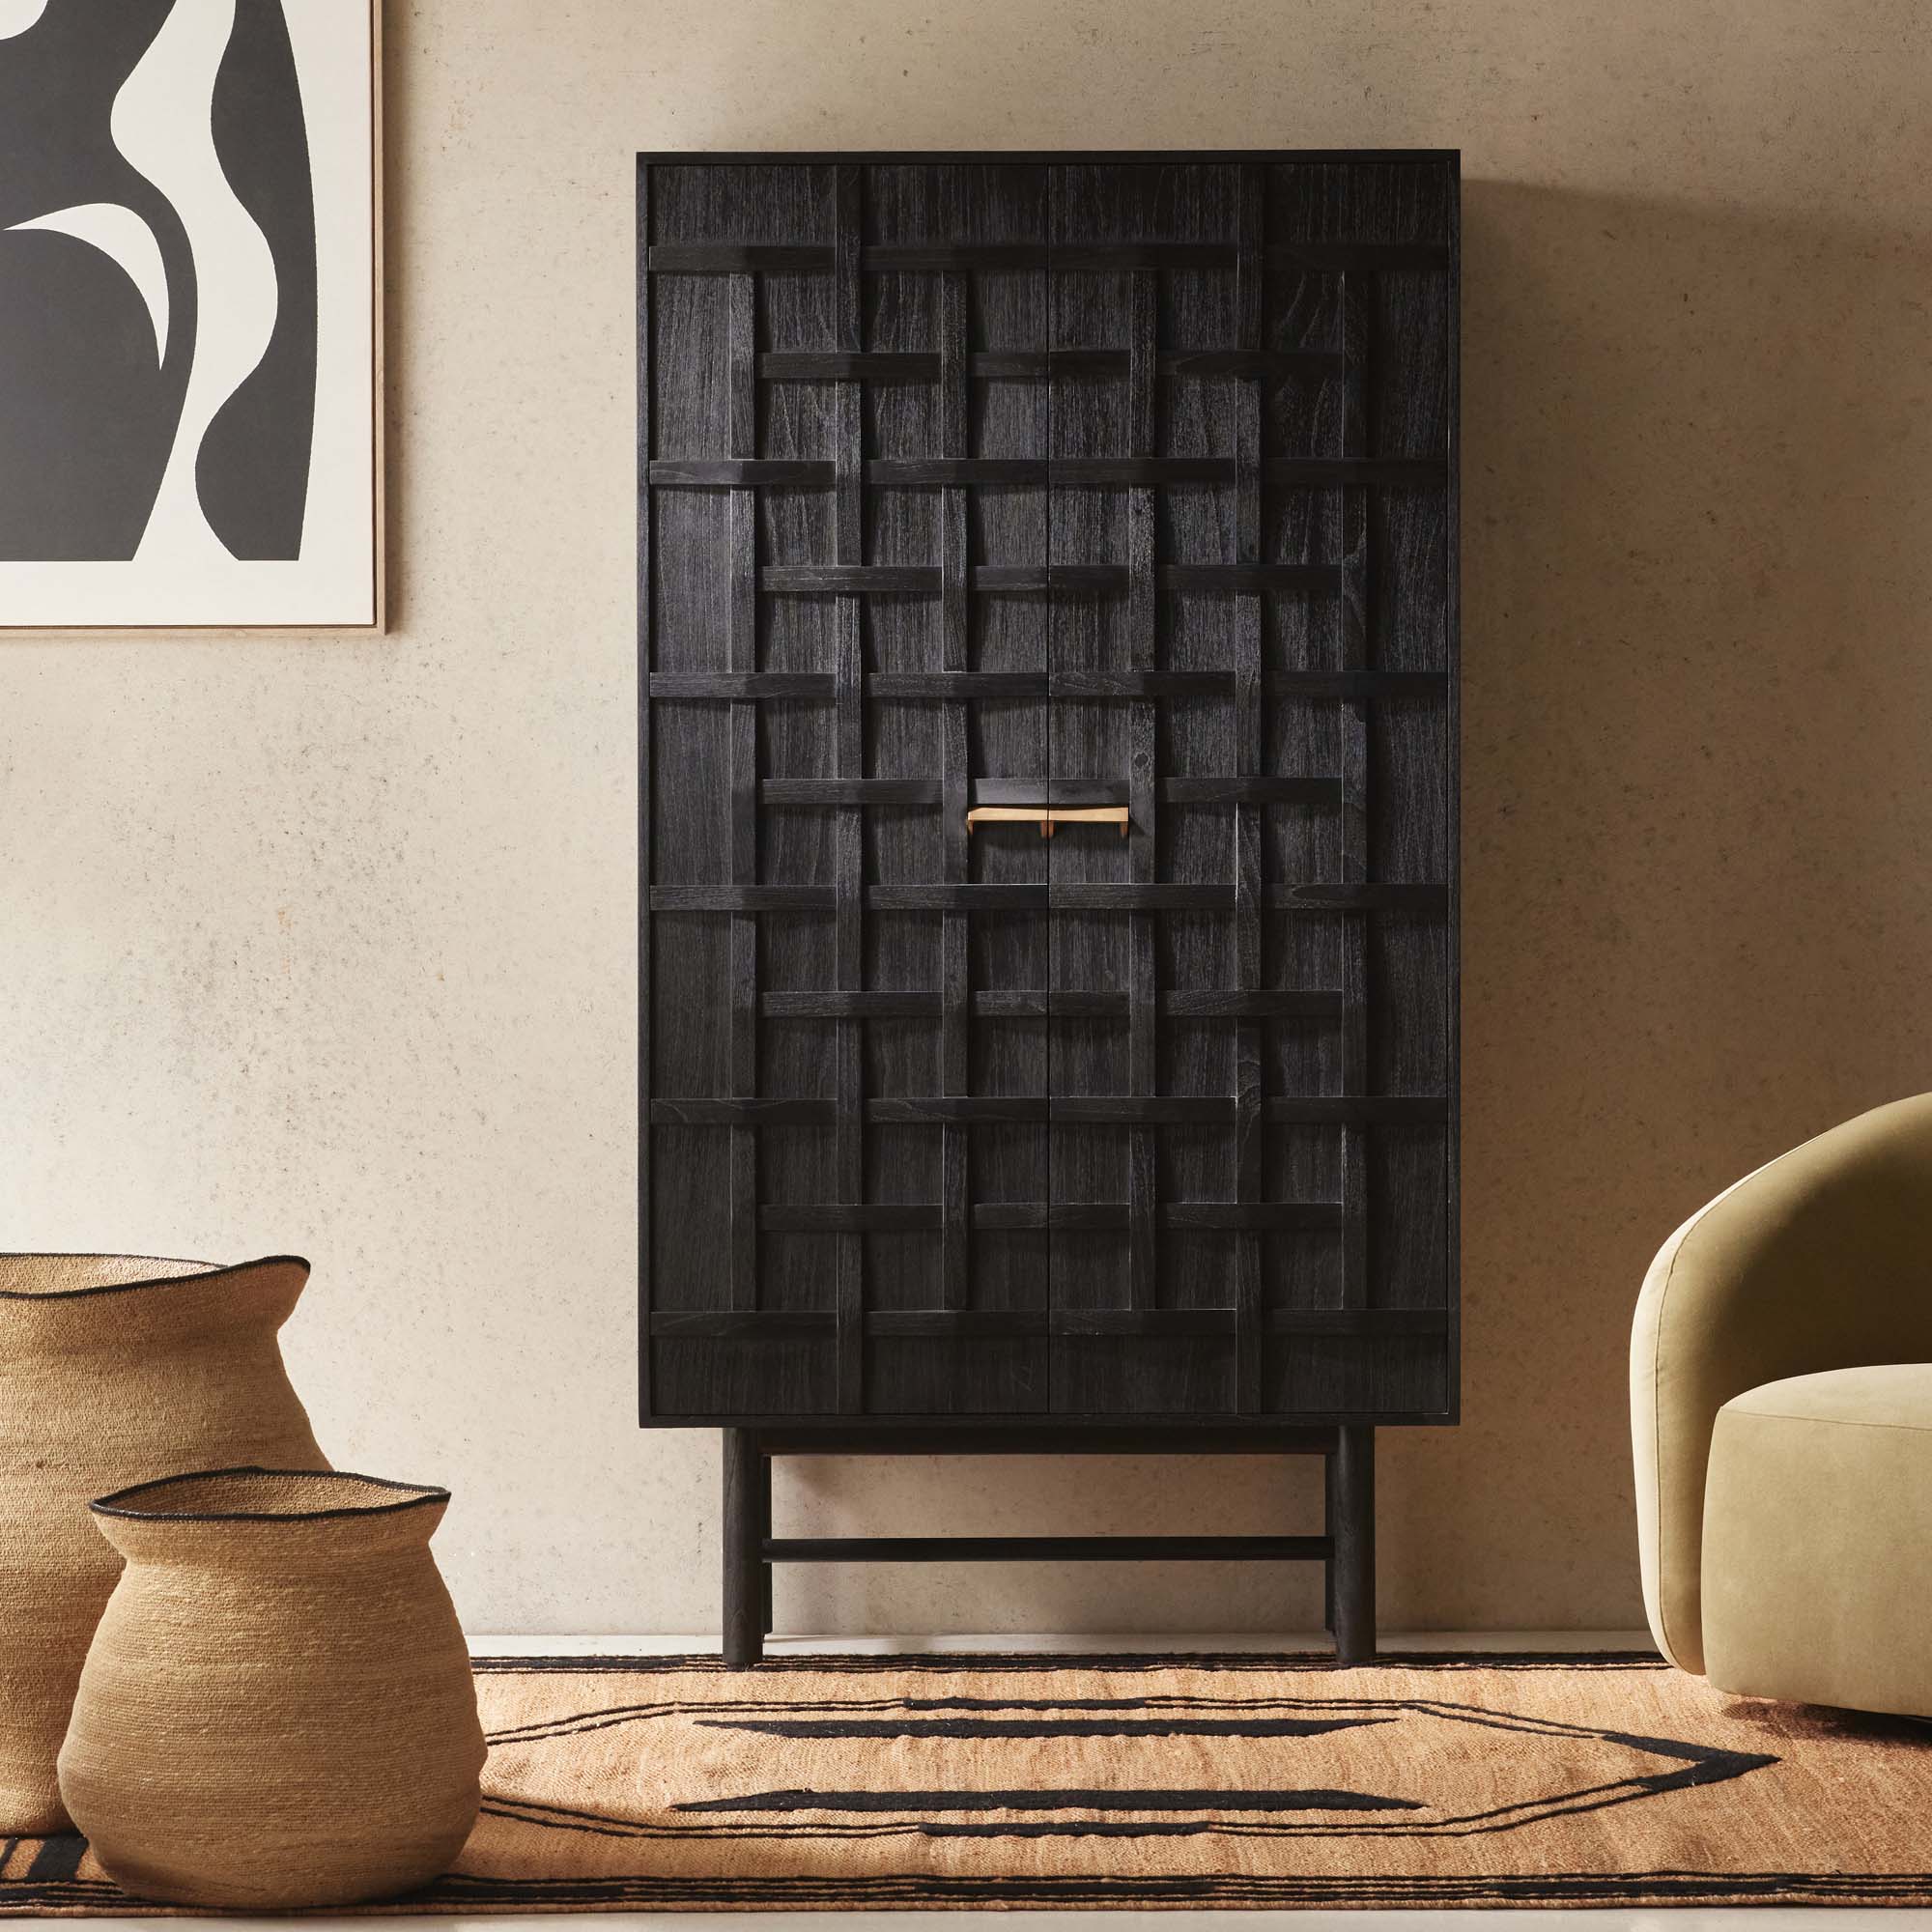 Ares Cabinet Black